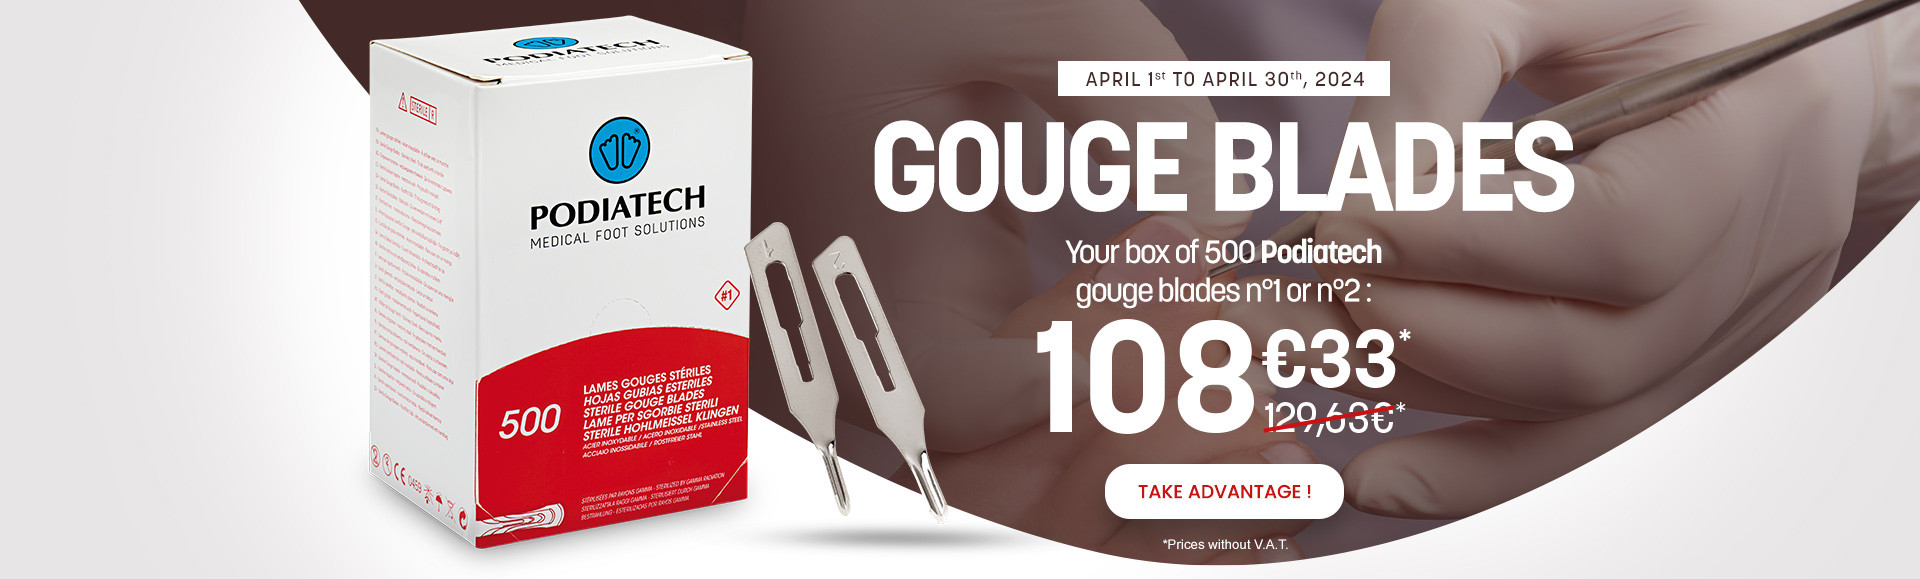 Box of 500 gouge blades at 108,33€ from April 1st to 30th